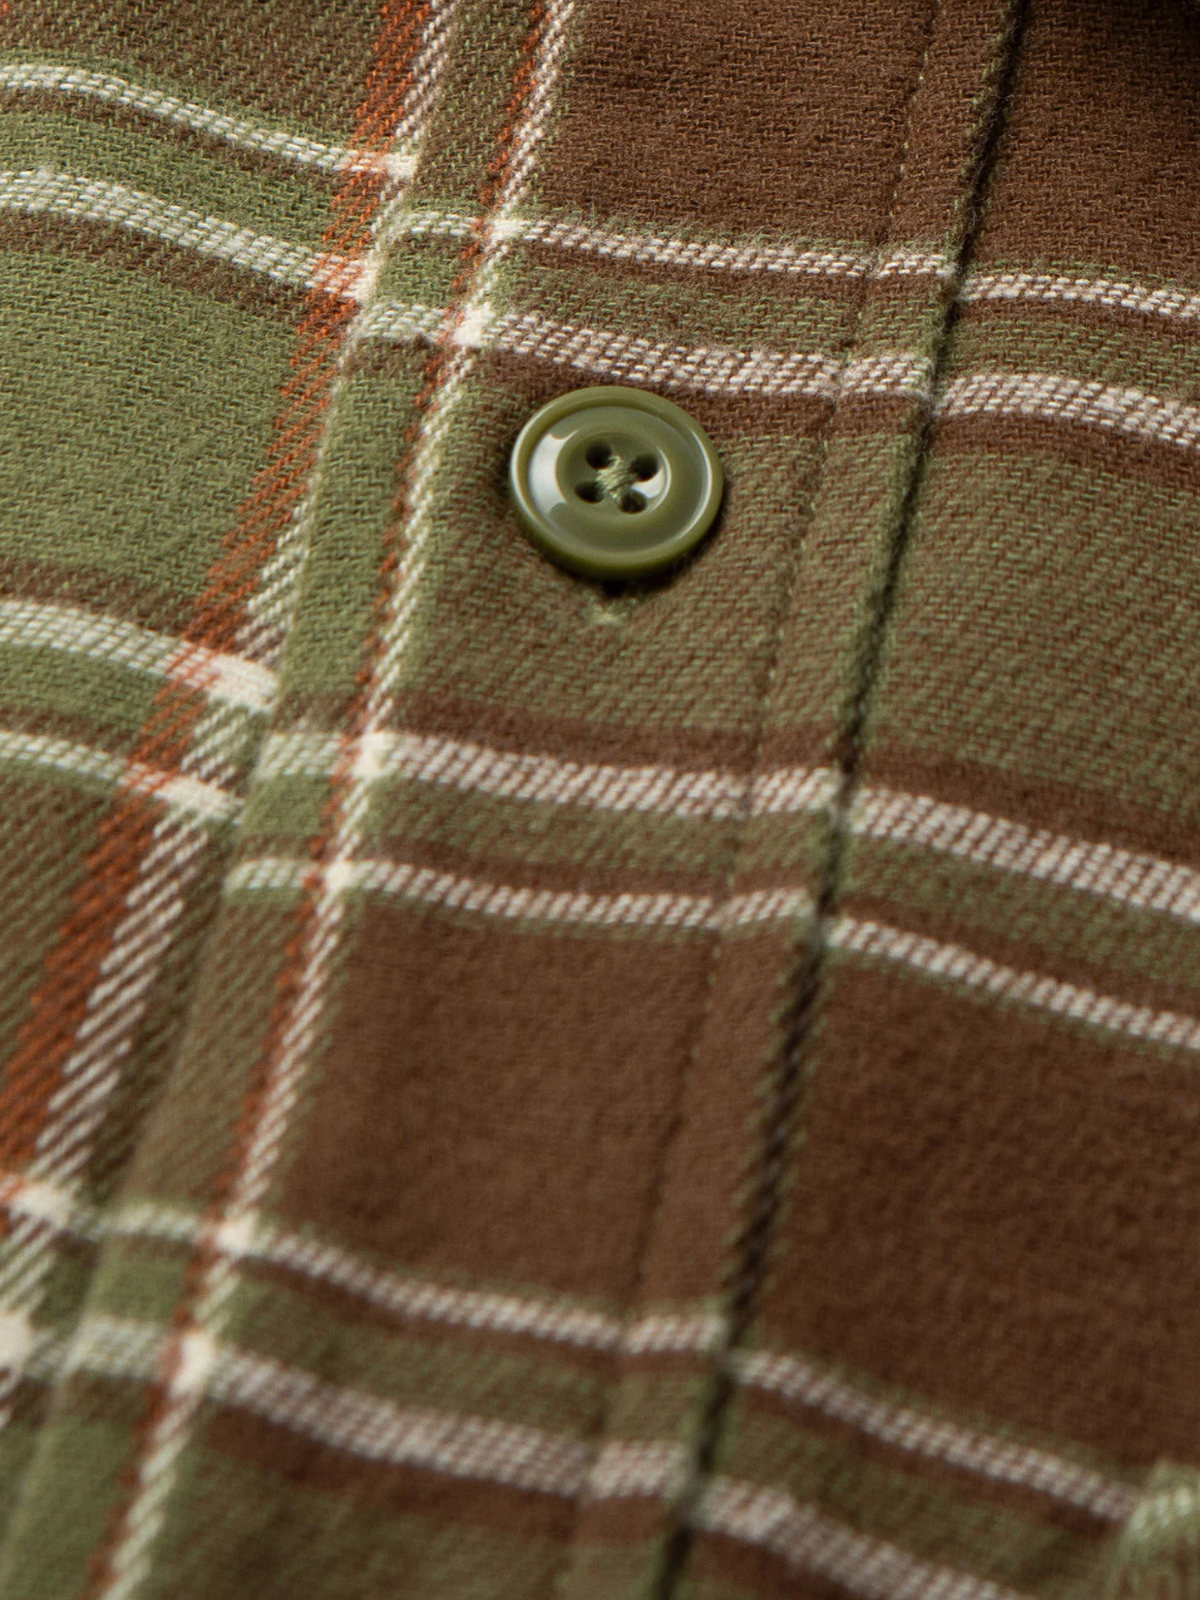 Seager Calico Flannel Double Pocket Flannel Kempt Athens GA Mens Clothing Store Downtown Athens Shopping